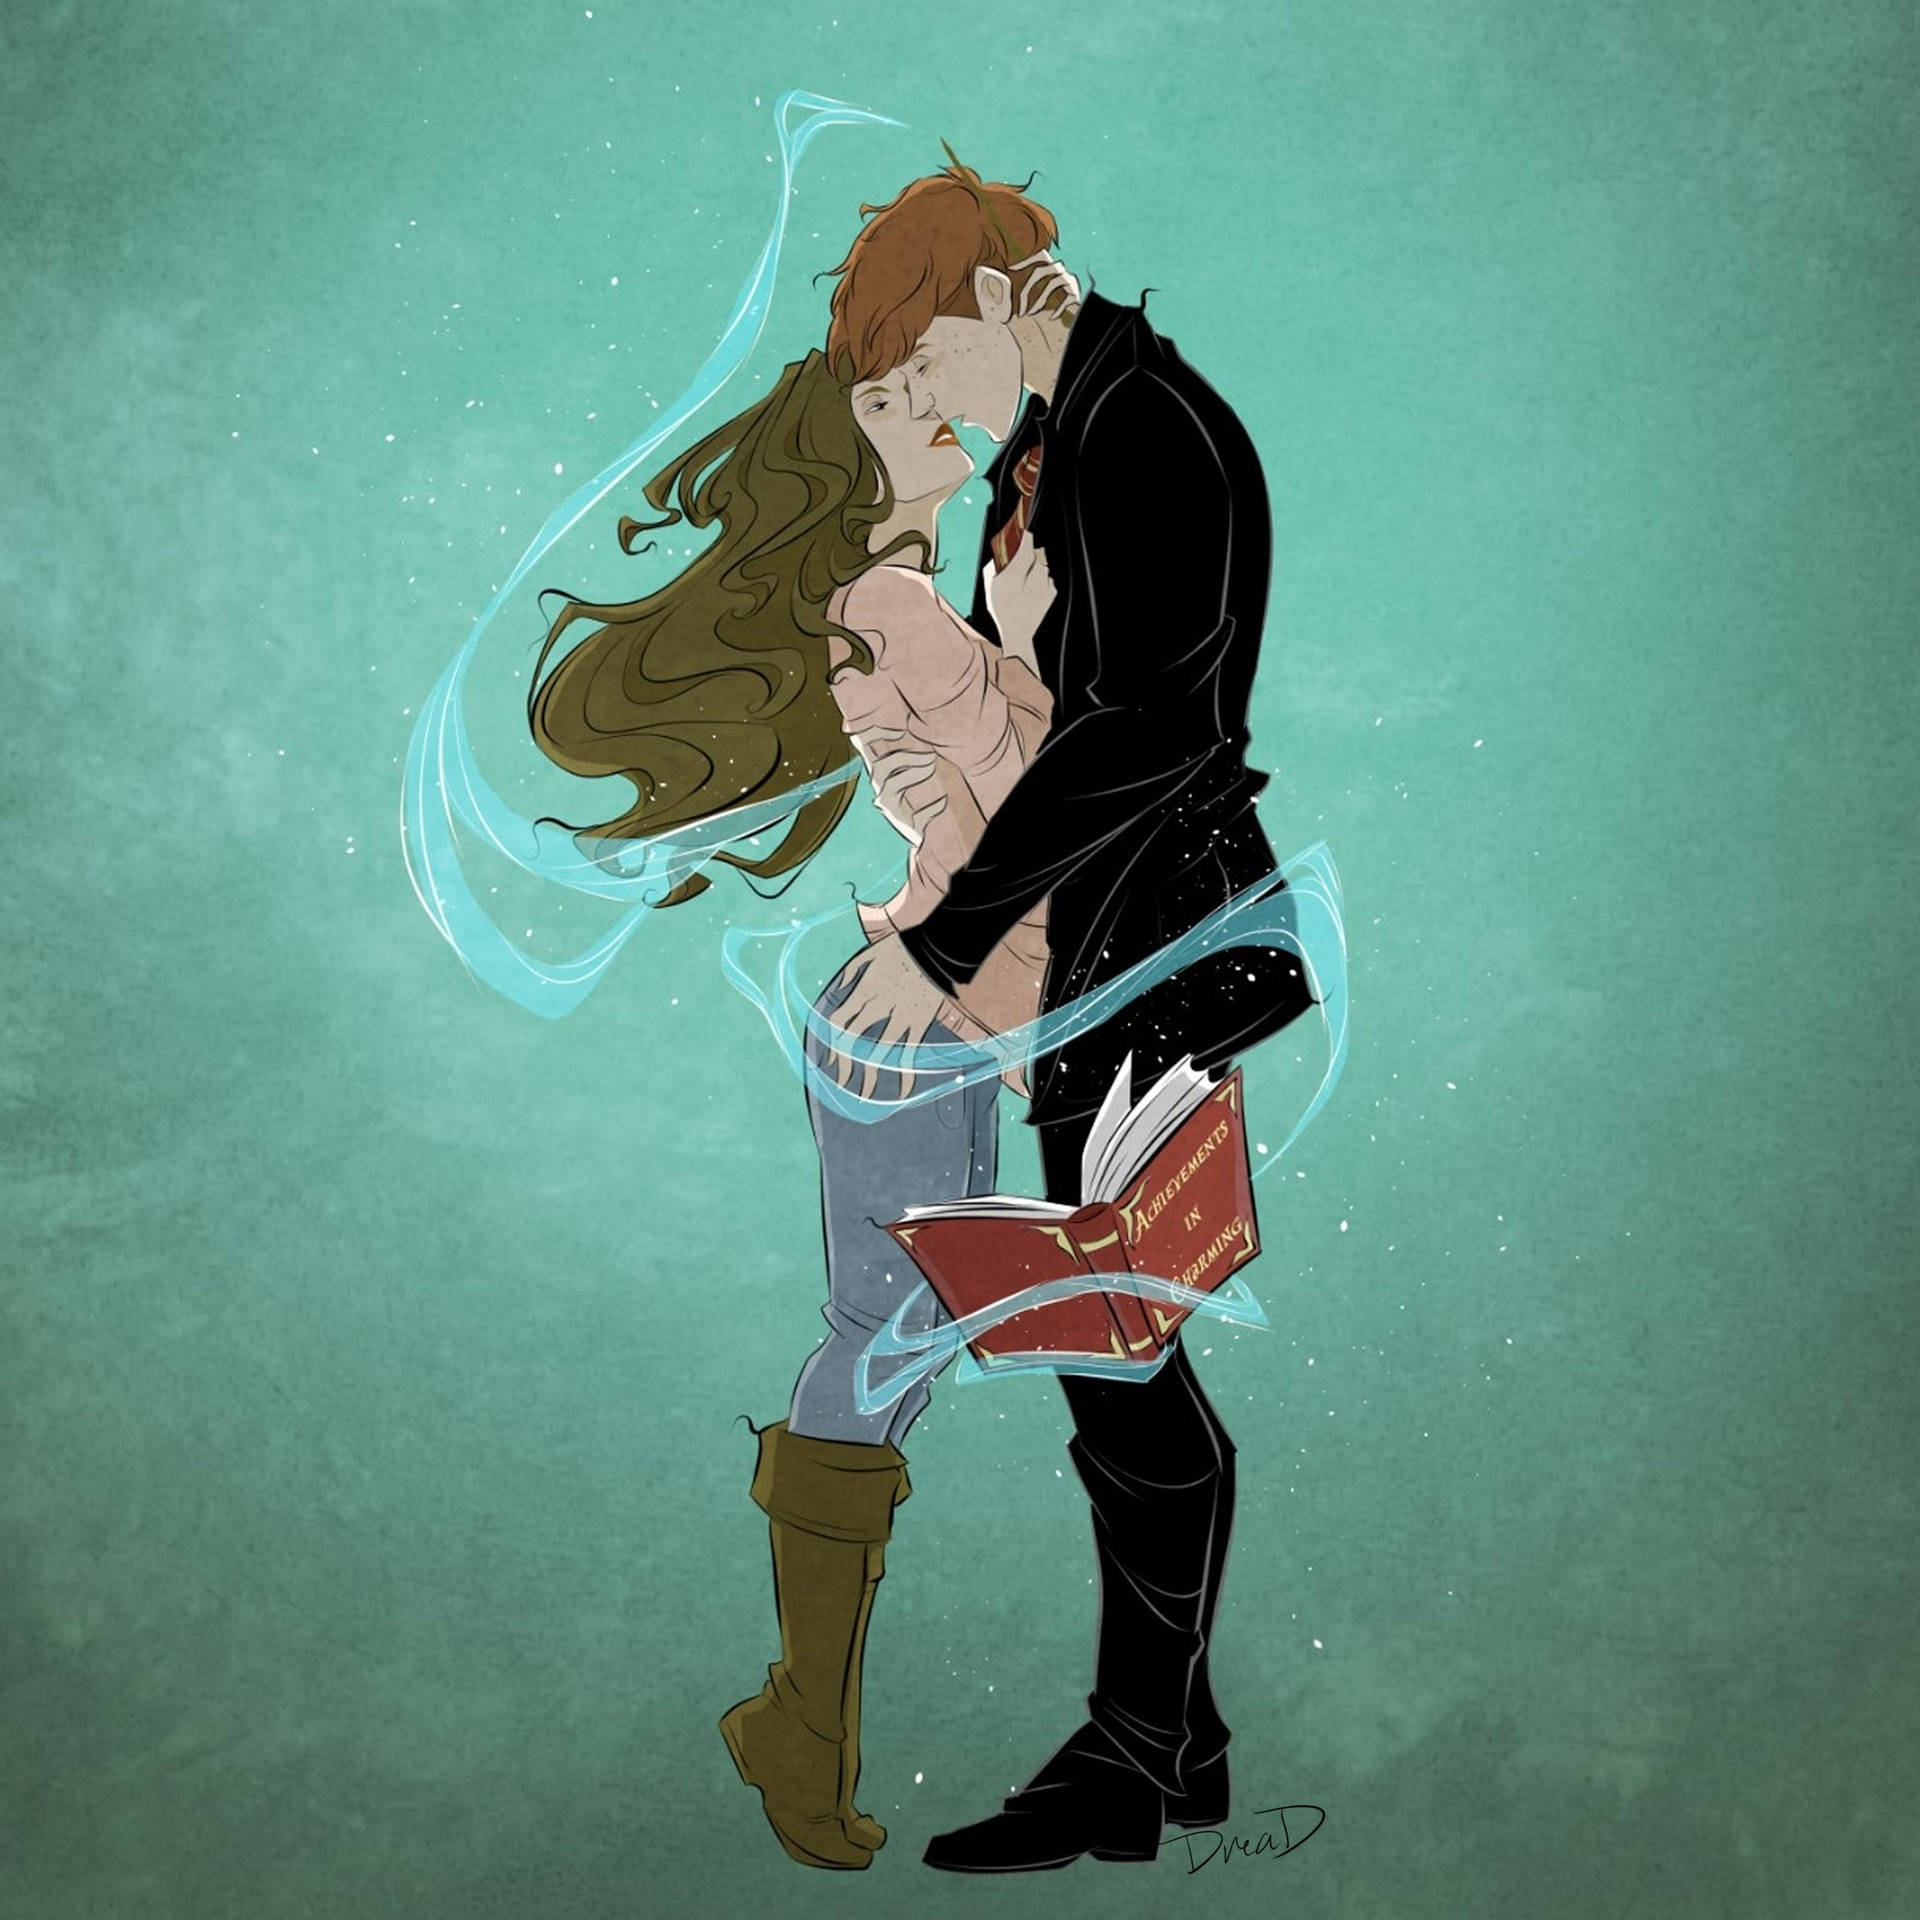 Hermione Granger shares a romantic kiss with Ron Weasley Wallpaper